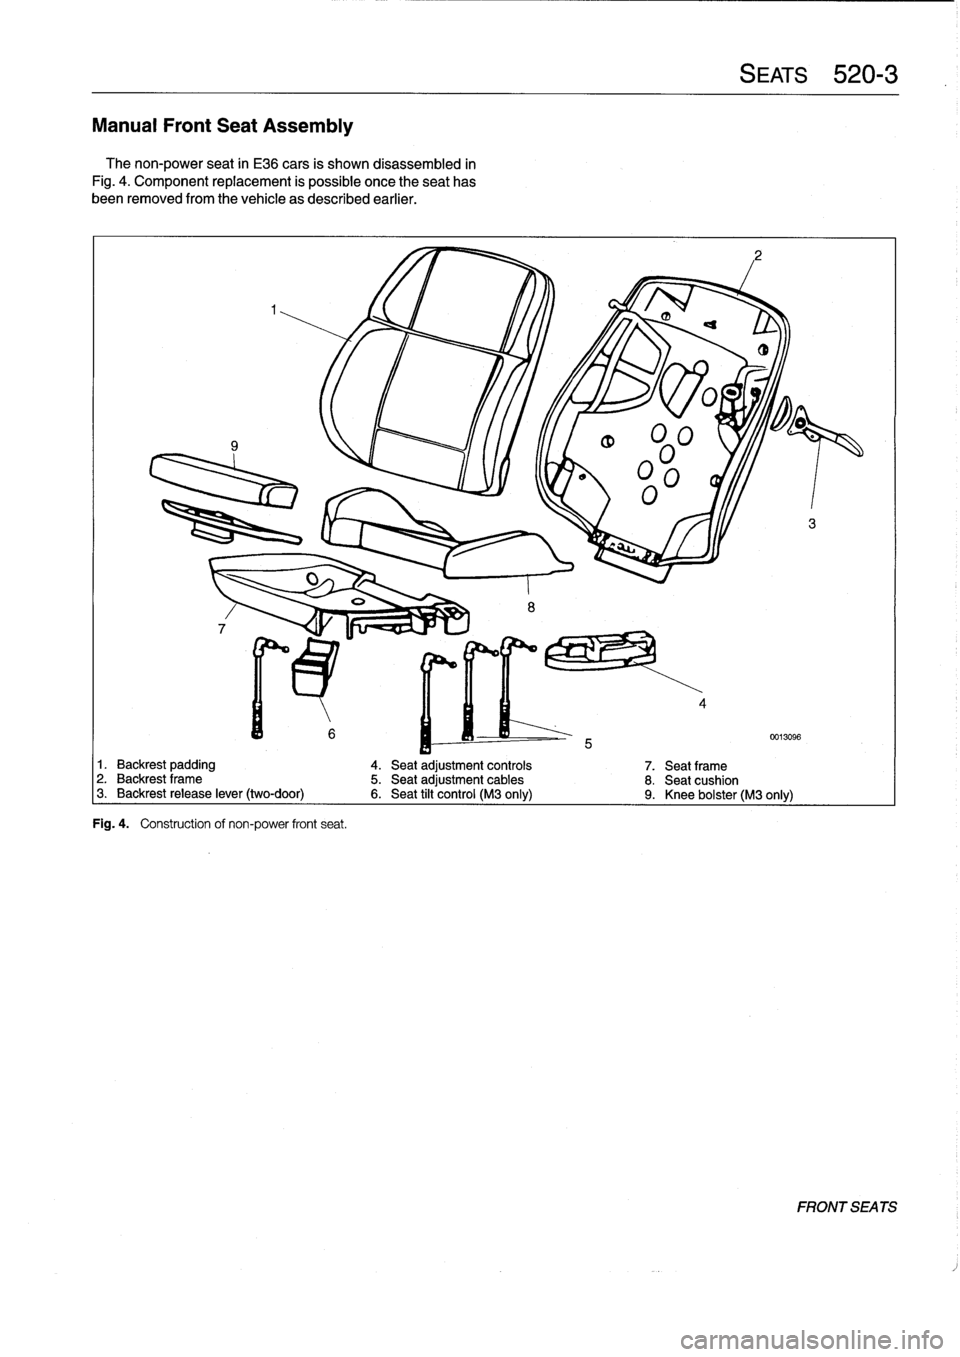 BMW 328i 1998 E36 Workshop Manual 
Manual
Front
Seat
Assembly

The
non-power
seat
in
E36
cars
is
shown
disassembled
in

Fig
.
4
.
Component
replacement
is
possible
once
theseat
has

been
removed
from
the
vehicle
as
described
earlier
.